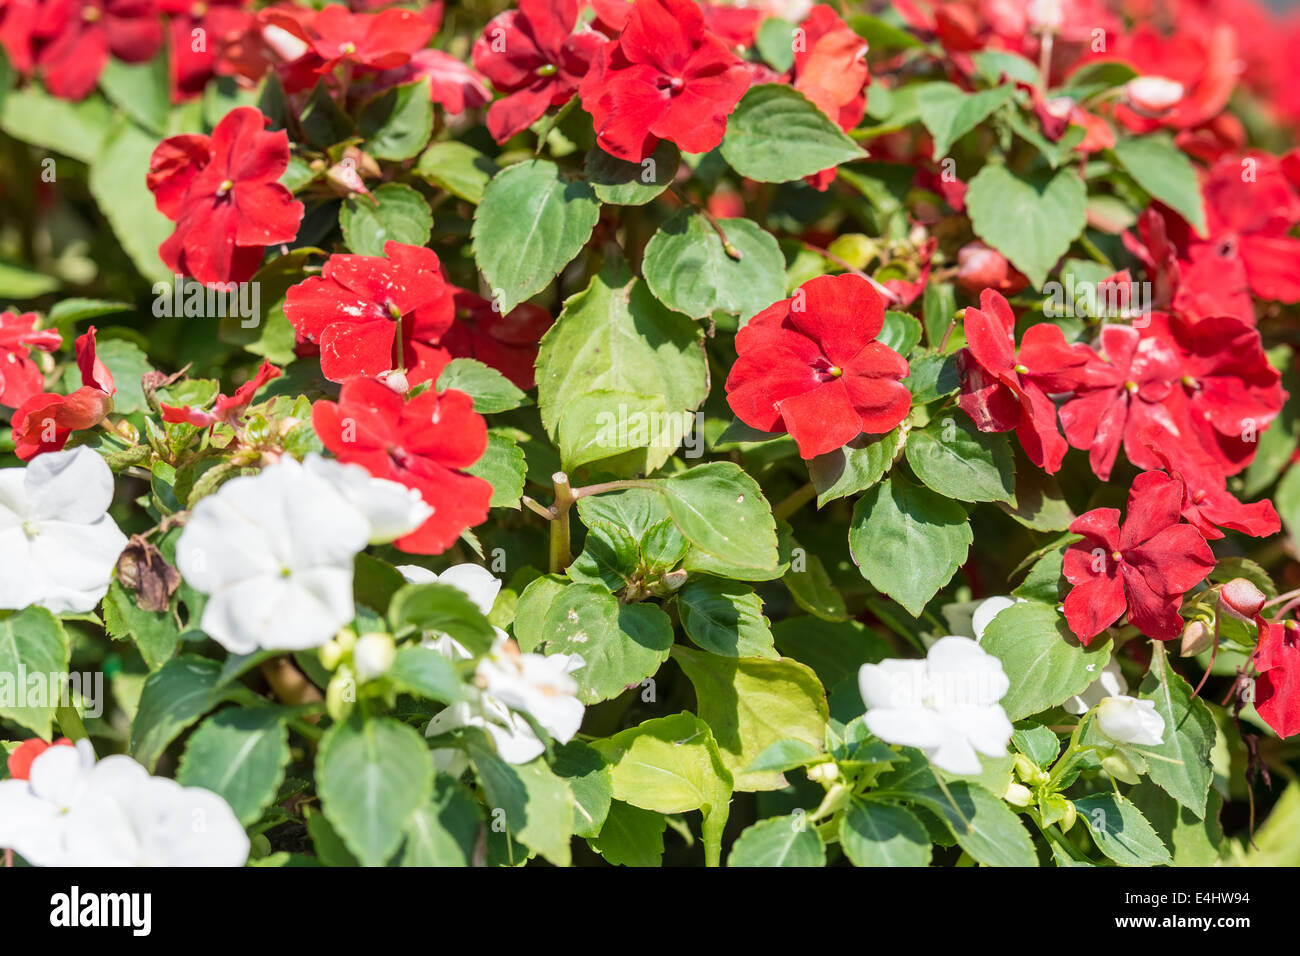 Red And White Flowers Summer Blossom Close Up Stock Photo